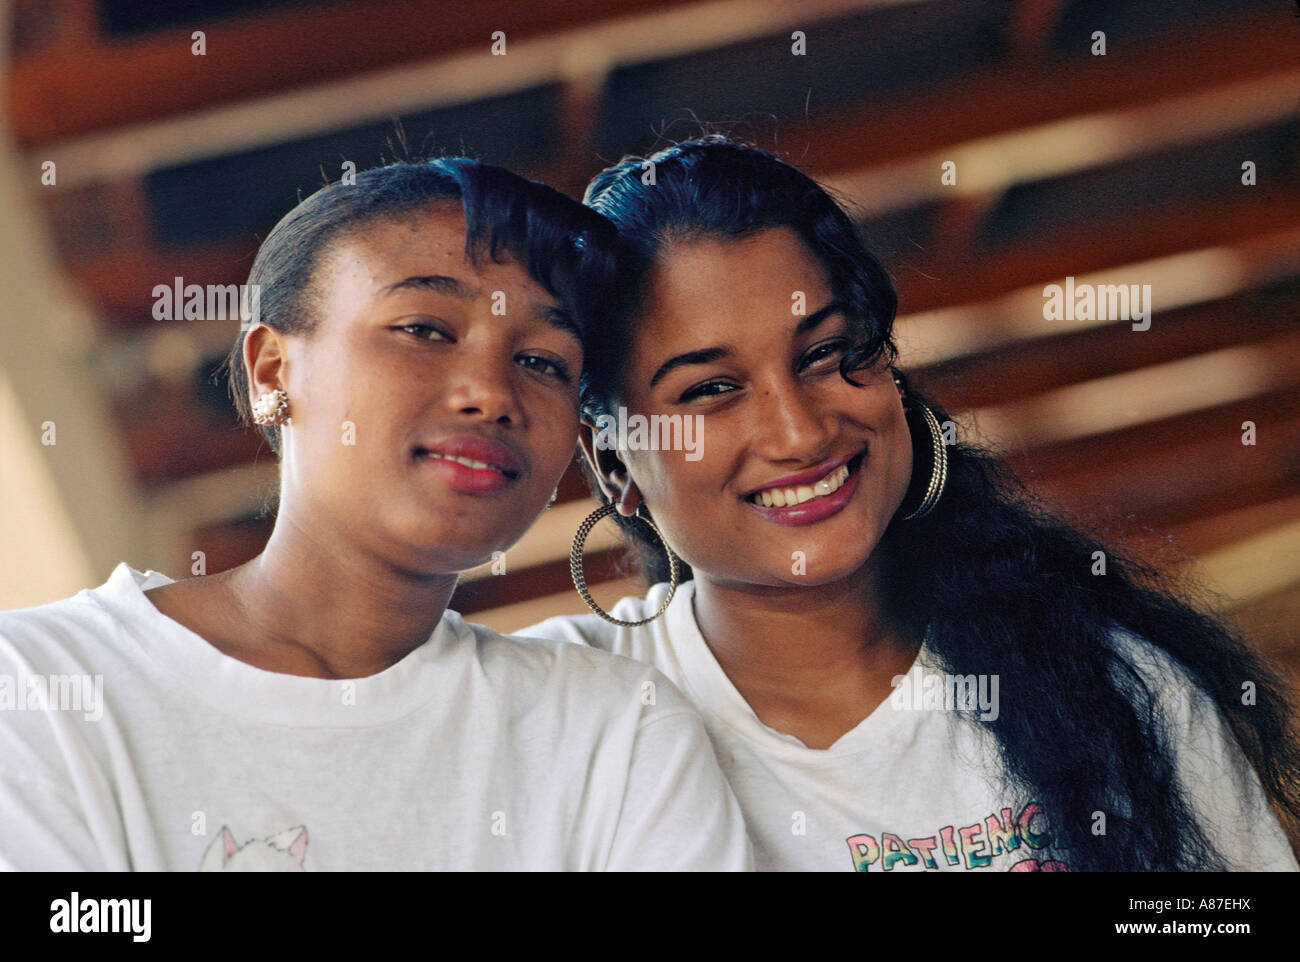 Portrait of two Dominican girls in Northwest Dominican Republic Stock Photo